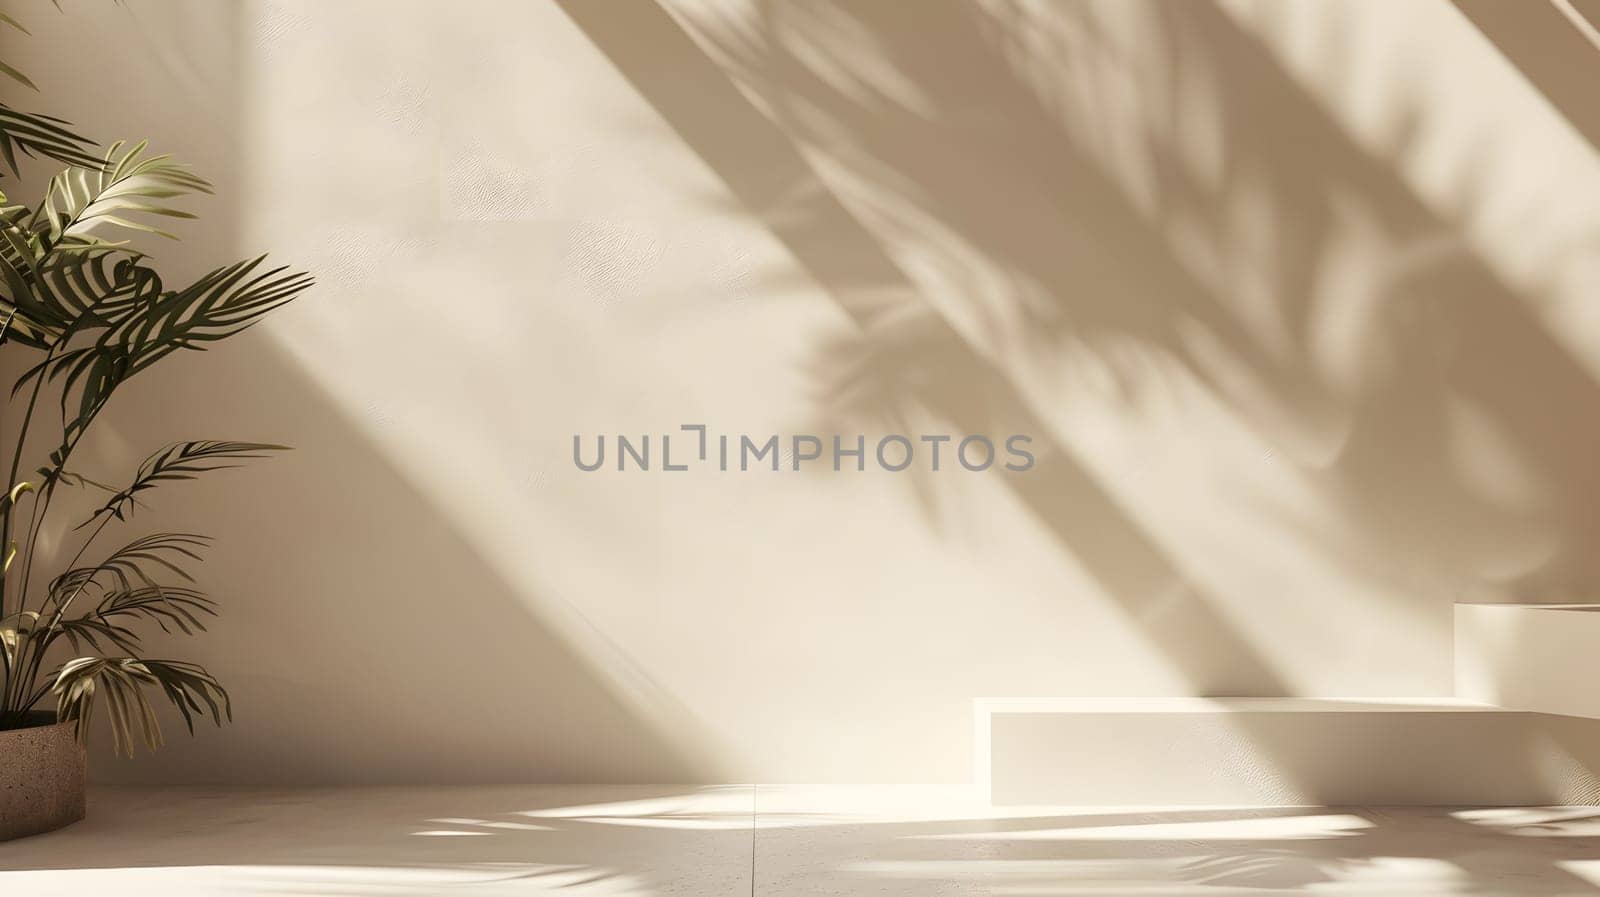 A potted plant sits against a wall with a shadow of a palm tree, overlooking a serene landscape with grass, water feature, and shades of green